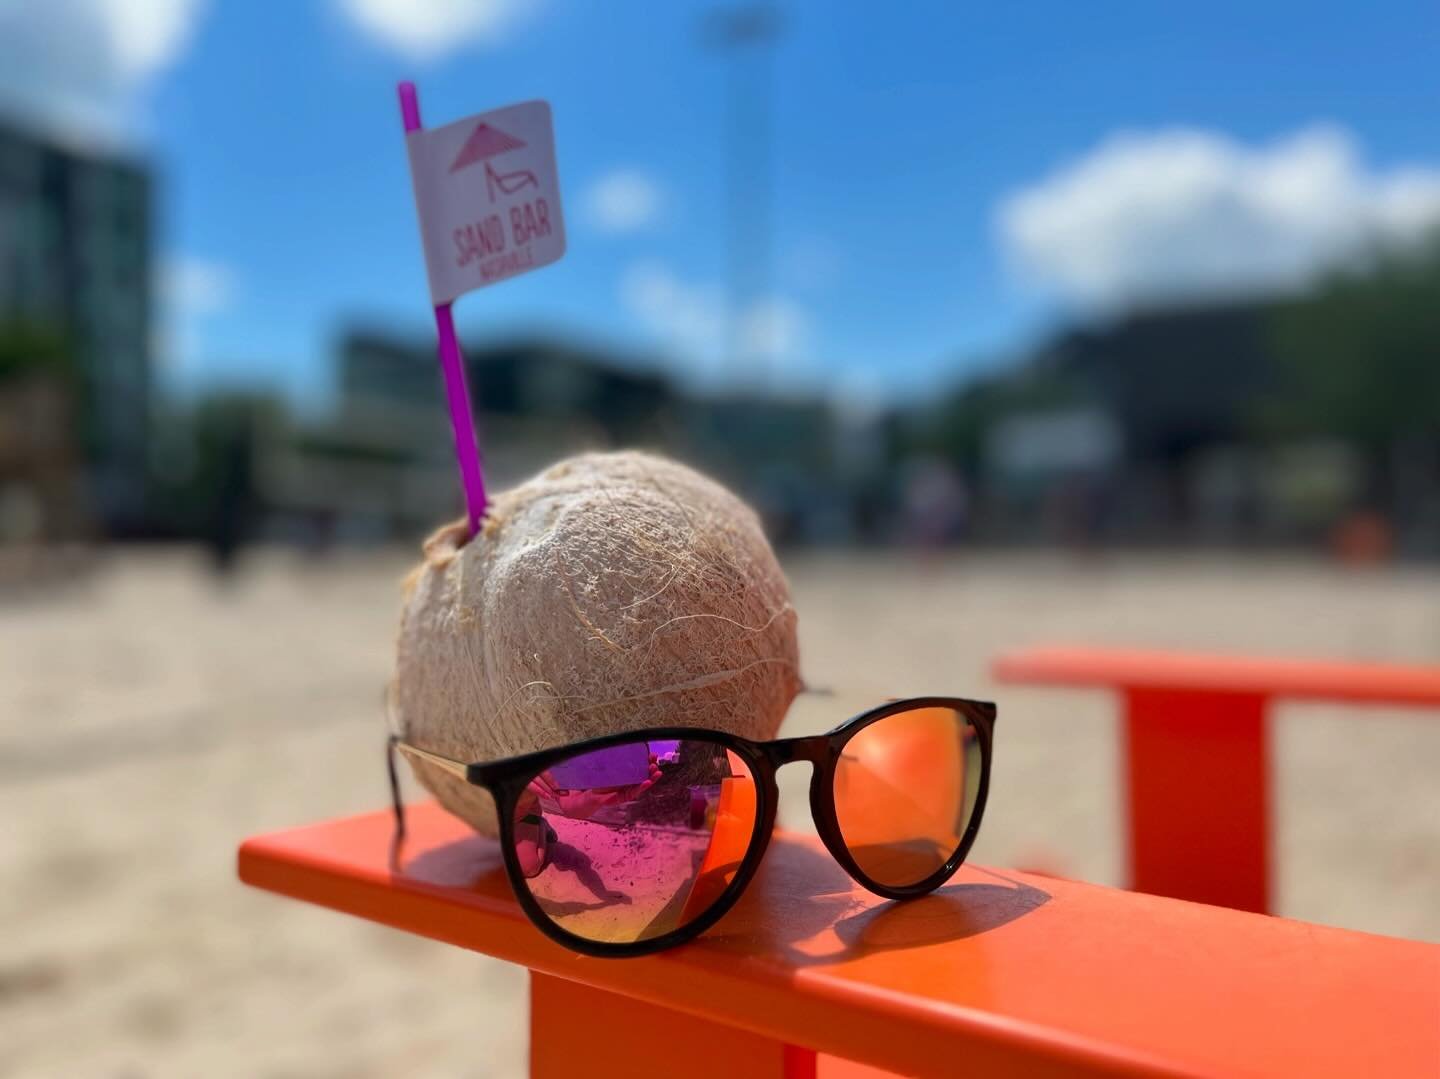 Doors open today at 11am and it&rsquo;s a sunnies kinda day! 😎😎 We have a few dog PAWties 🤗🐶🥳 on the books today so come on out and enjoy the sunshine, have some delicious alcoholic and nonalcoholic beverages, and love on some pups! As Ice Cube 